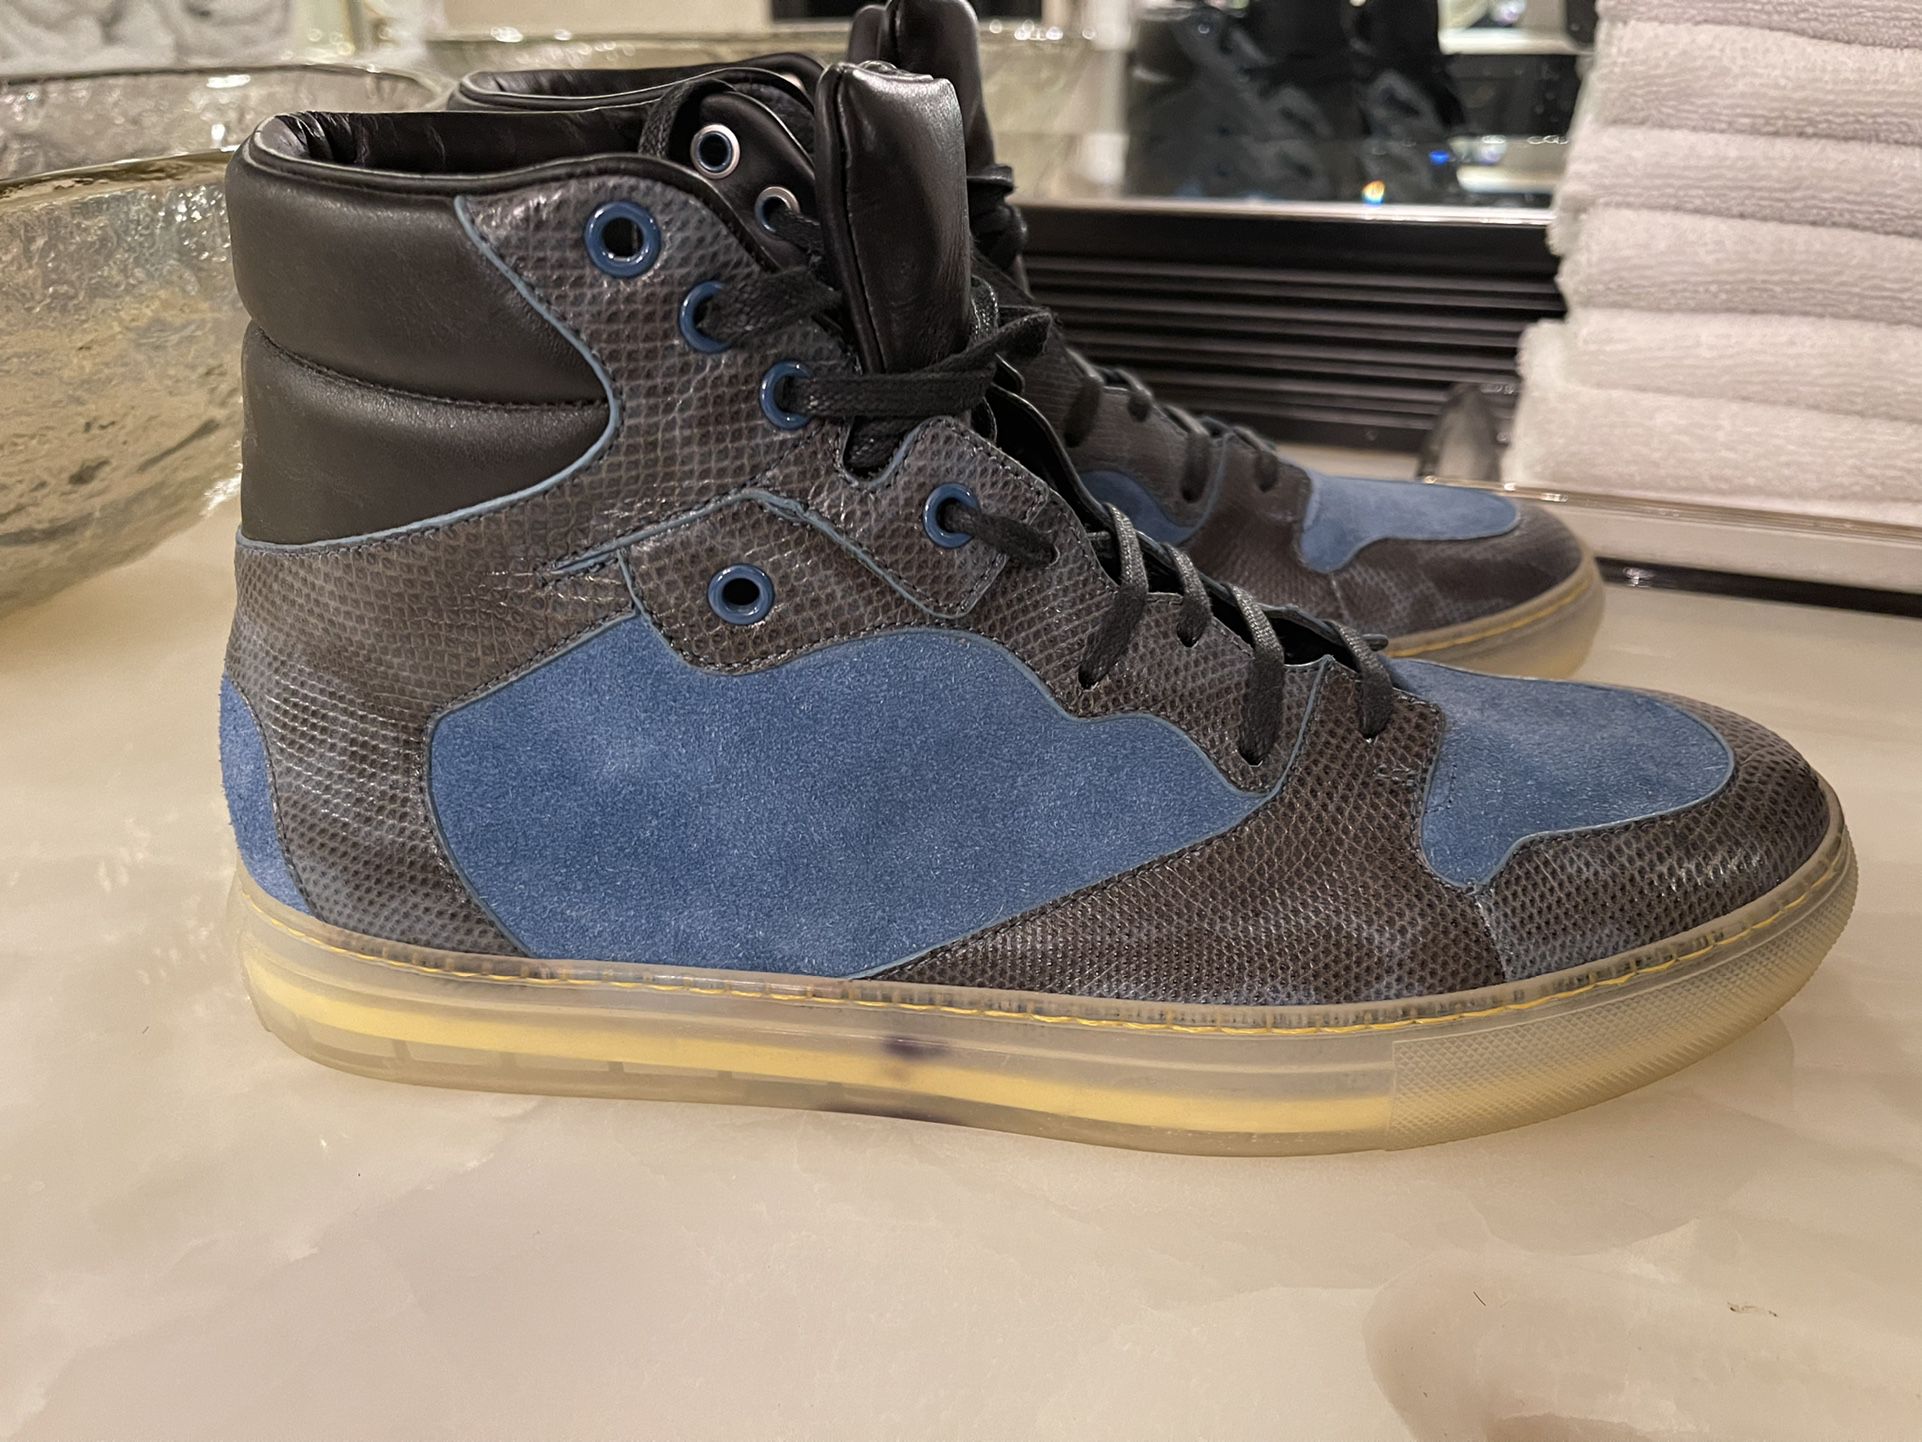 Balenciaga High Top Suede Python Sneakers Sold Out Everywhere!! for Sale in Fort FL -